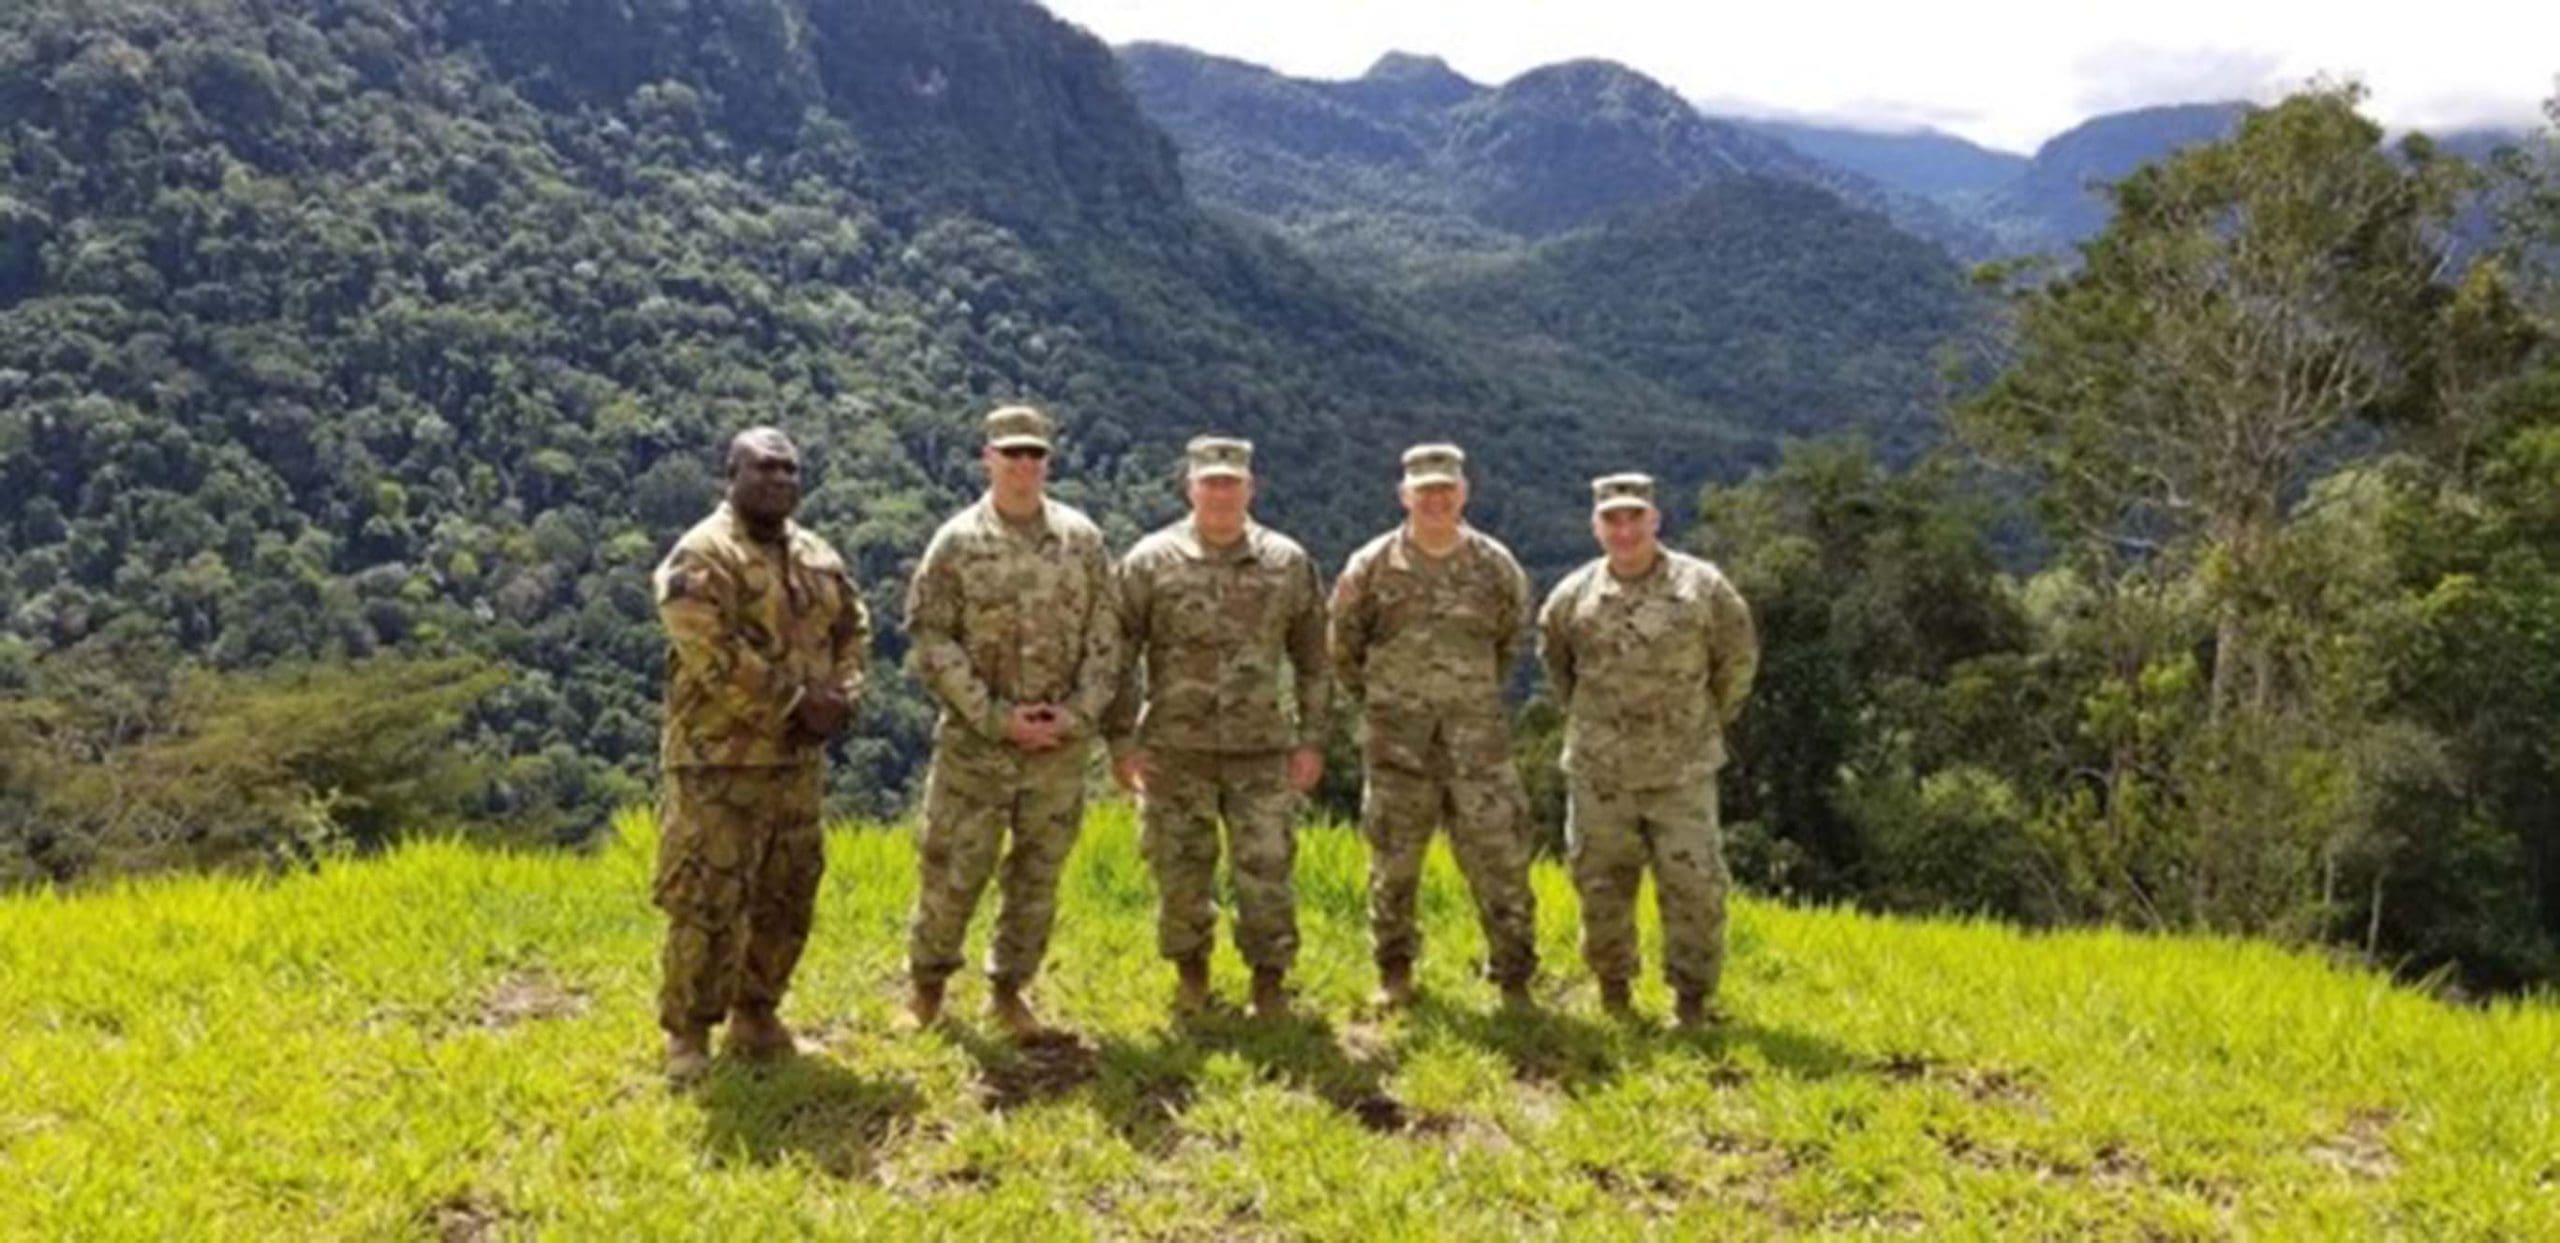 A delegation of Wisconsin Army National Guard Soldiers including (from left) Maj. Steve Harteau, Command Sgt. Maj. John Dietzler, Col. Raymond Ripberger, and Lt. Col. Derrek Schultheiss visit the Kokoda Trail in Papua New Guinea in July 2021. The Wisconsin National Guard began a new partnership with Papua New Guinea in 2020 as part of the State Partnership Program. Submitted photo